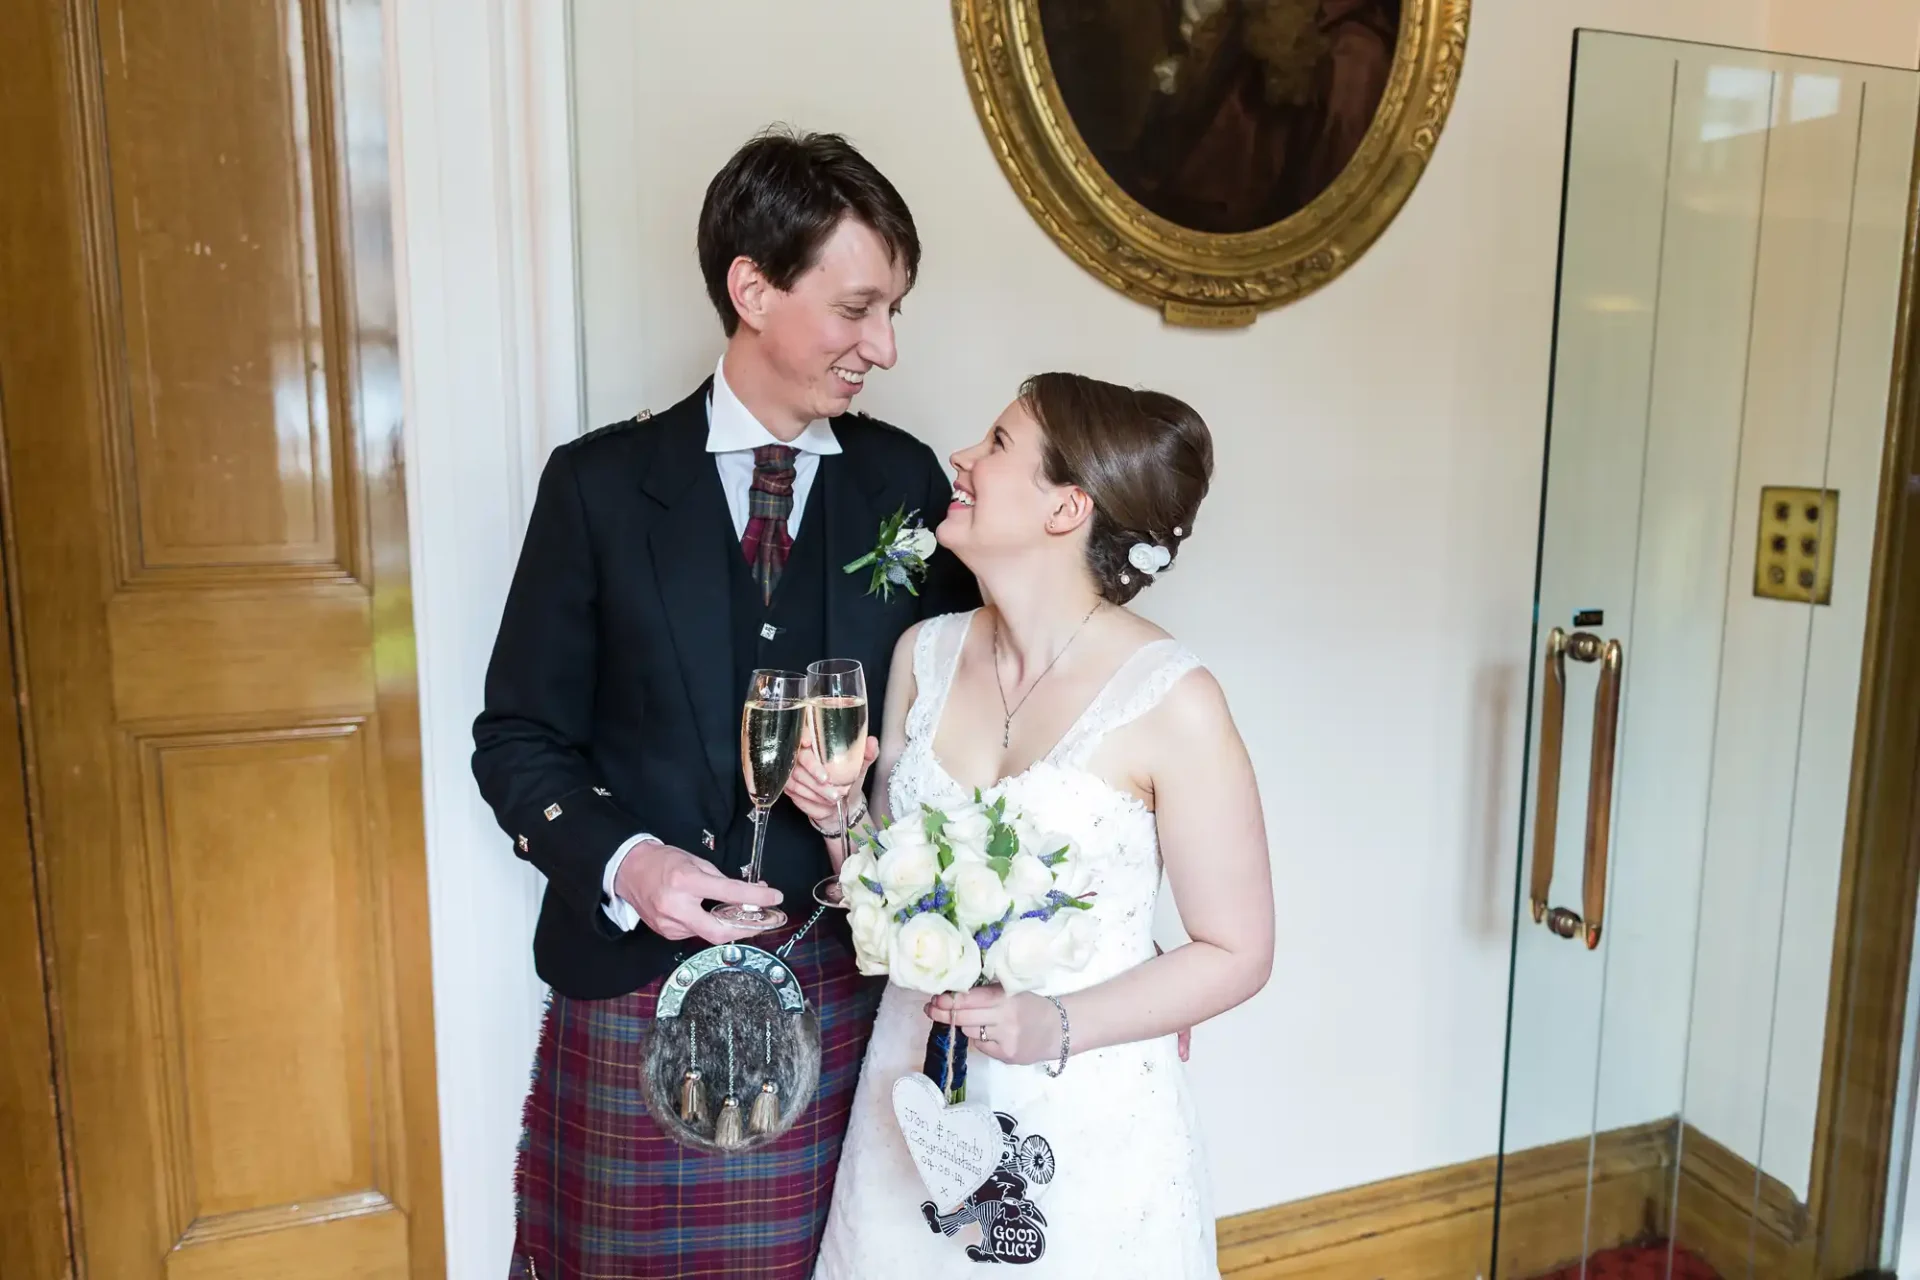 A couple in wedding attire smiling at each other, holding champagne flutes, with the groom wearing a kilt.